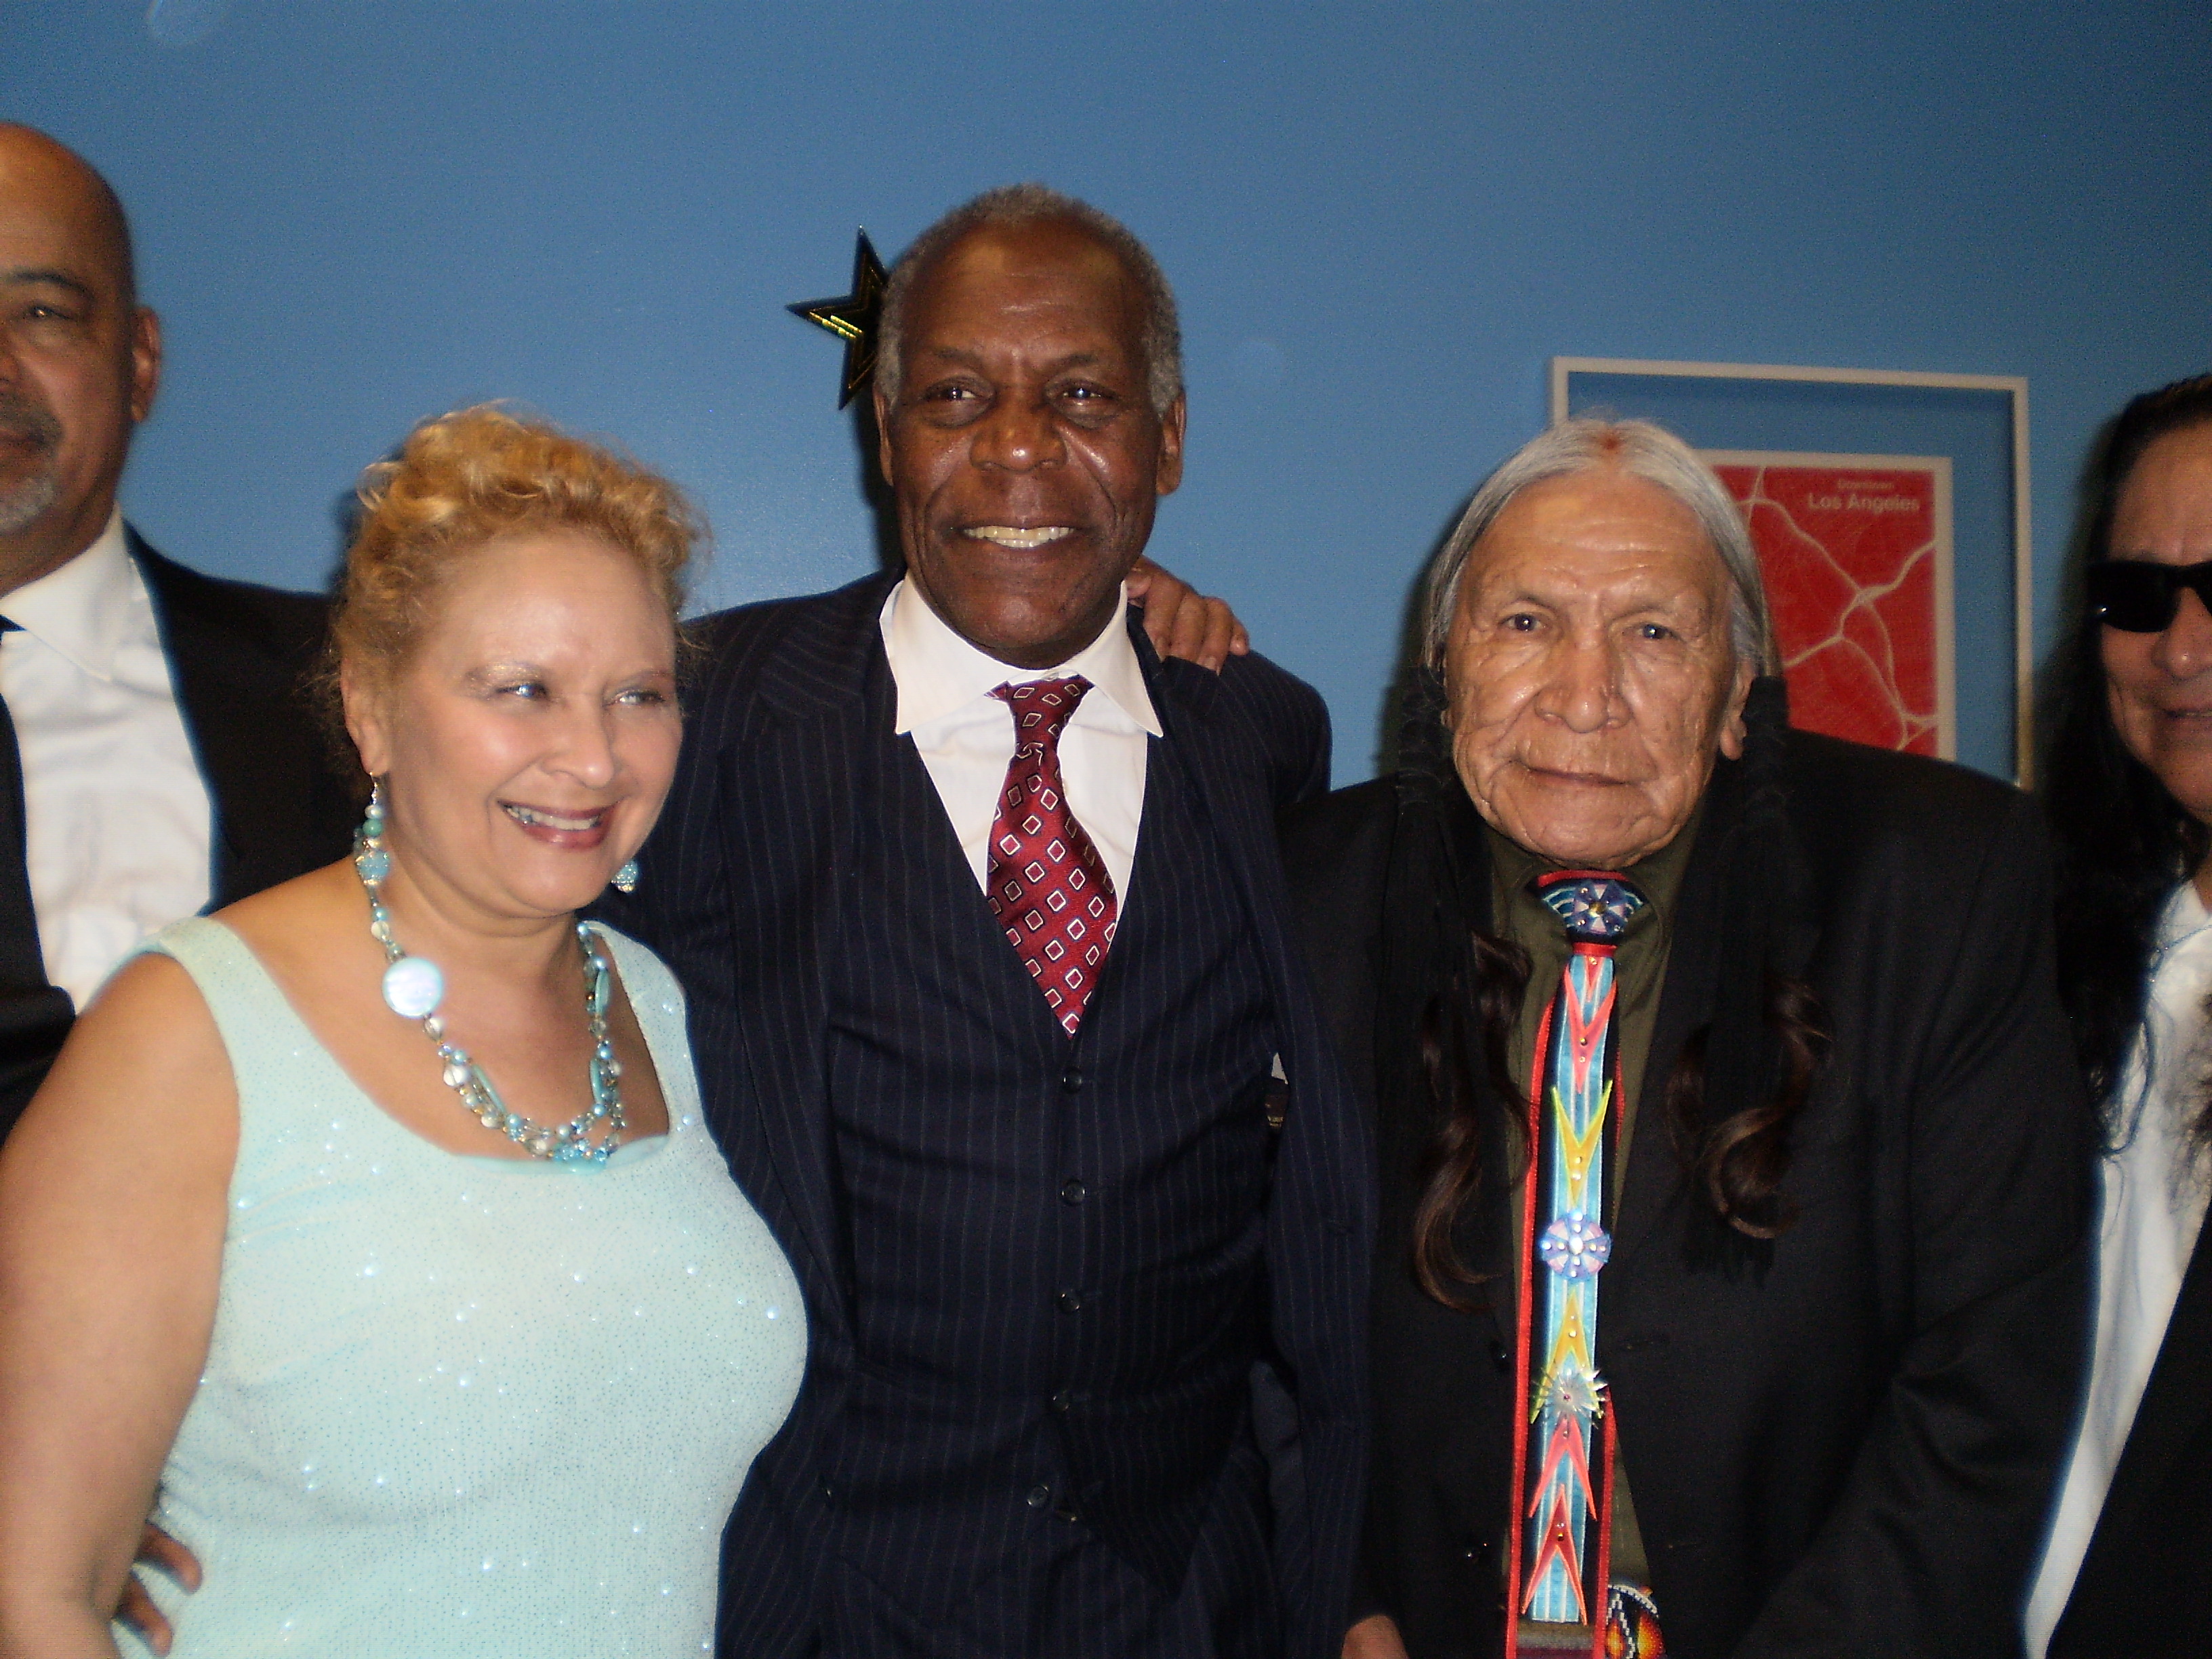 Oscar party with Danny Glover and Saginaw Grant